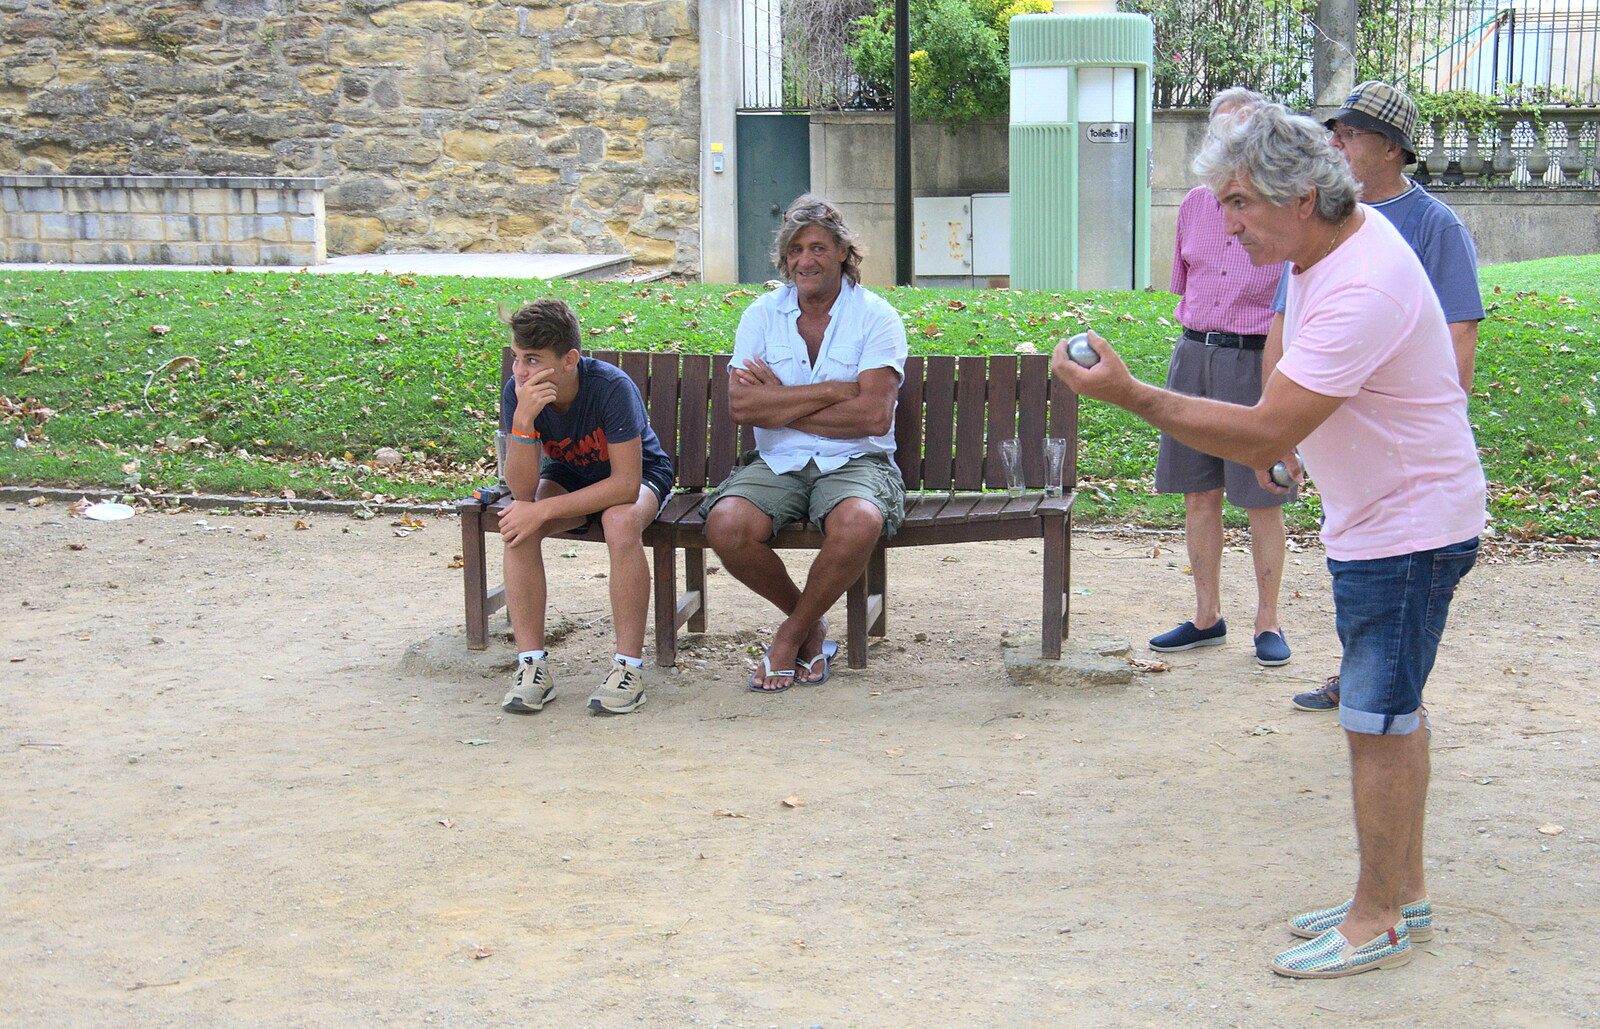 The game of boules is on from Le Gouffre Géant and Grotte de Limousis, Petanque and a Lightning Storm, Languedoc, France - 12th August 2018